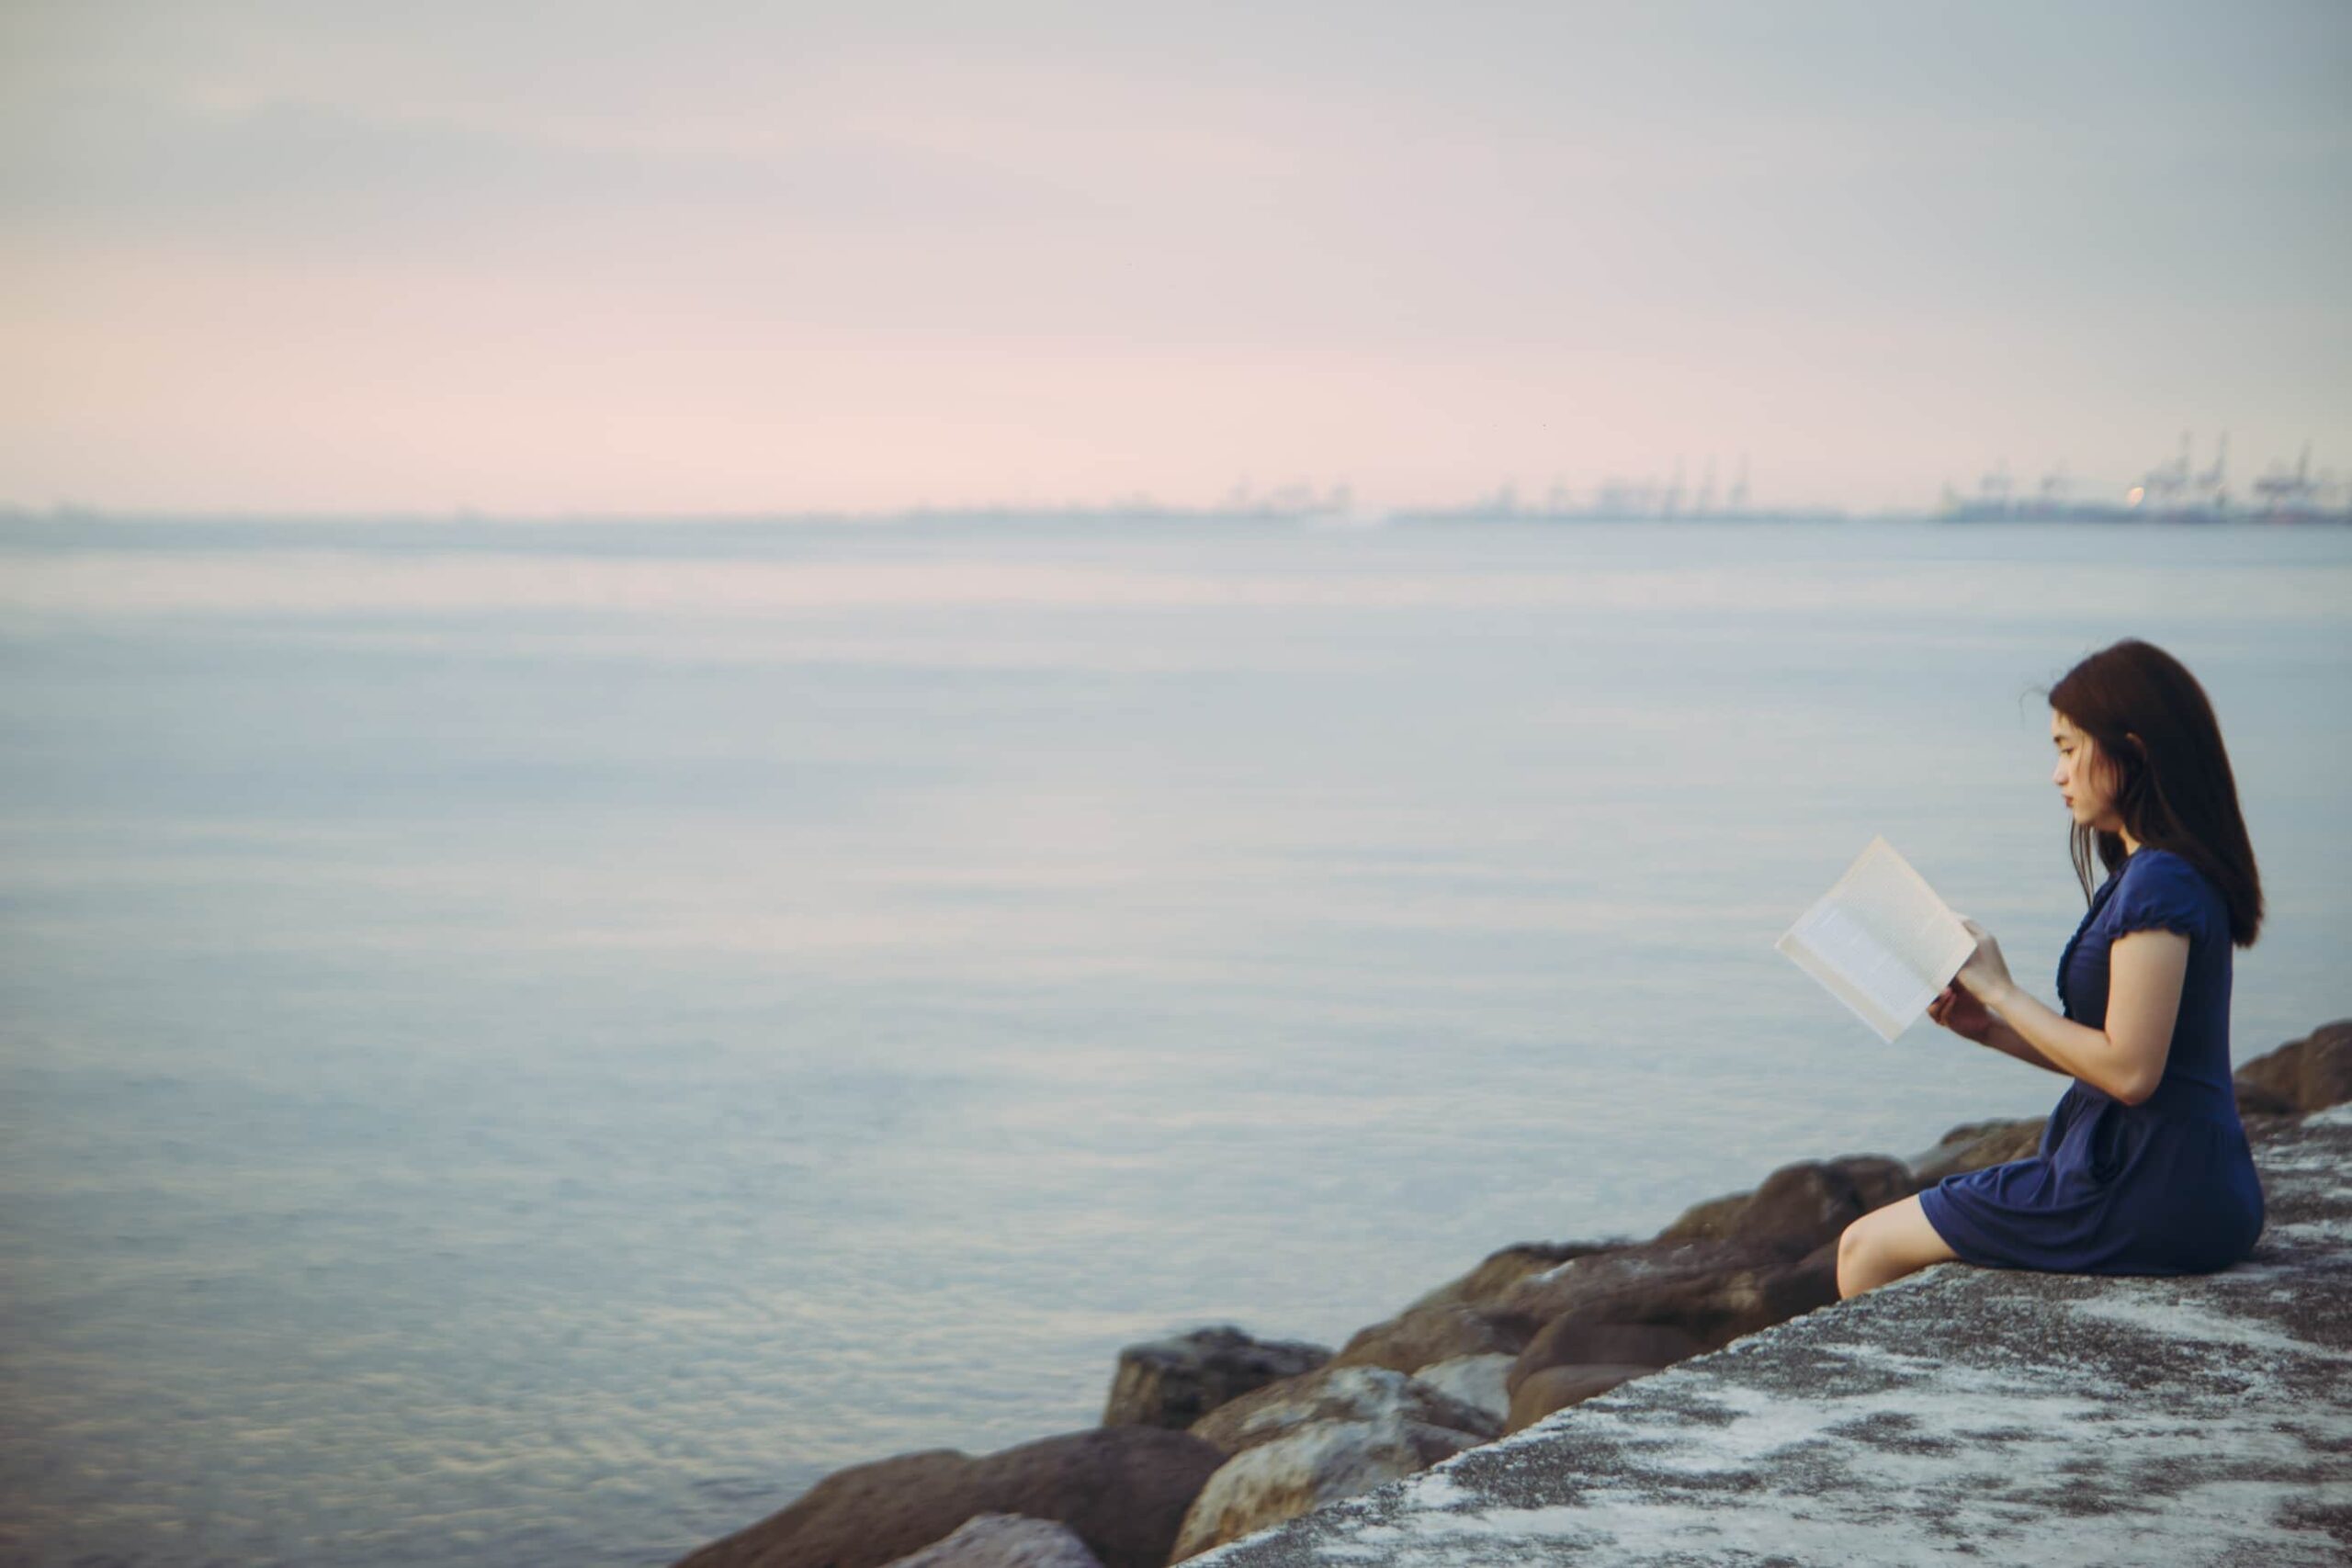 A woman is sitting on a sea wall reading a book. In the background is an ocean with a sunset.